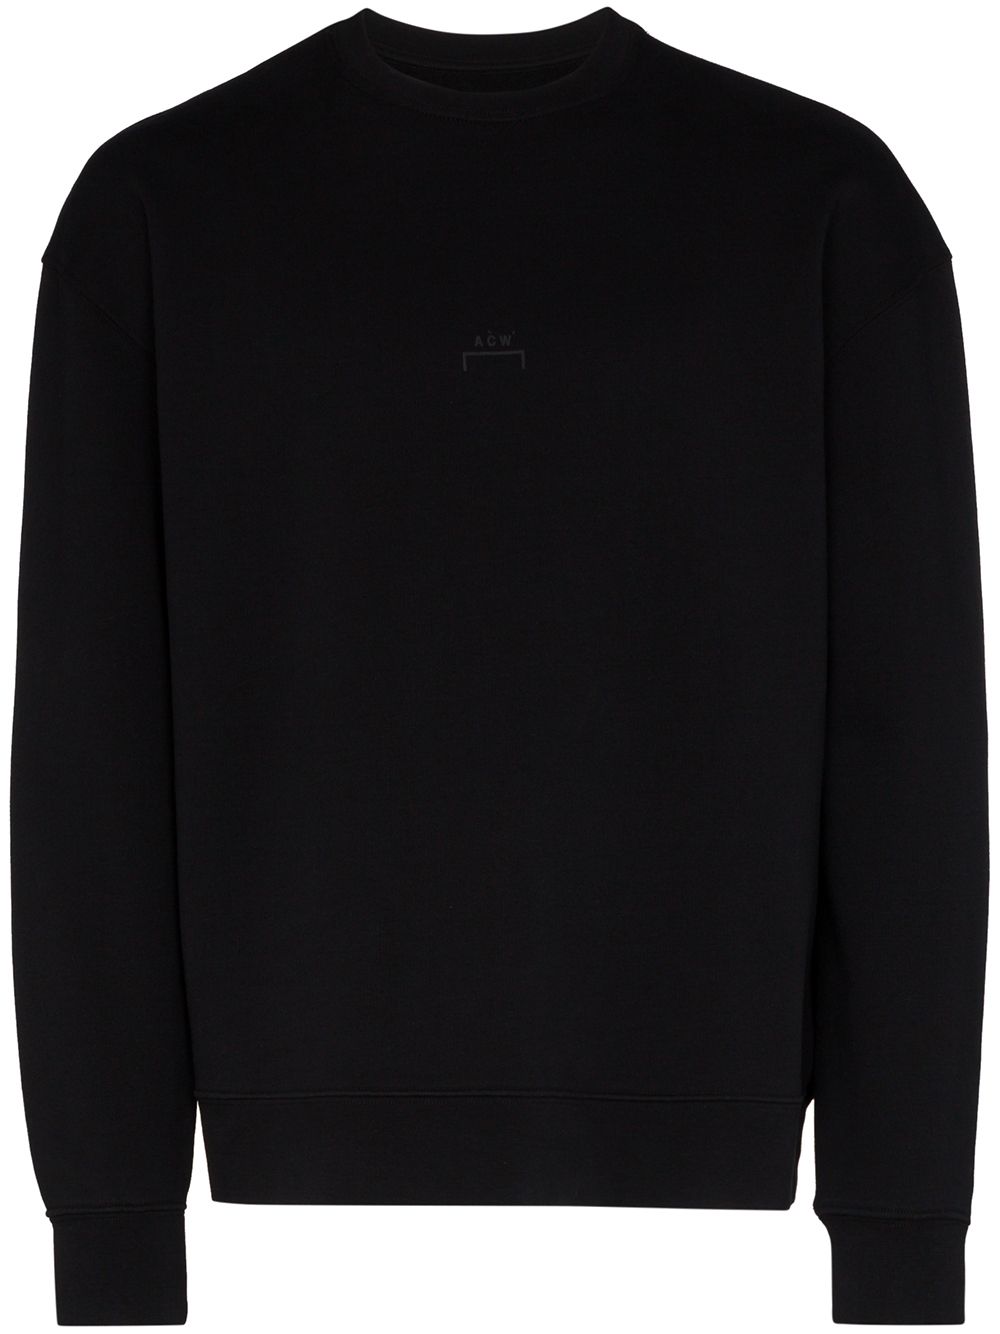 A-COLD-WALL* LOGO CREW-NECK SWEATER